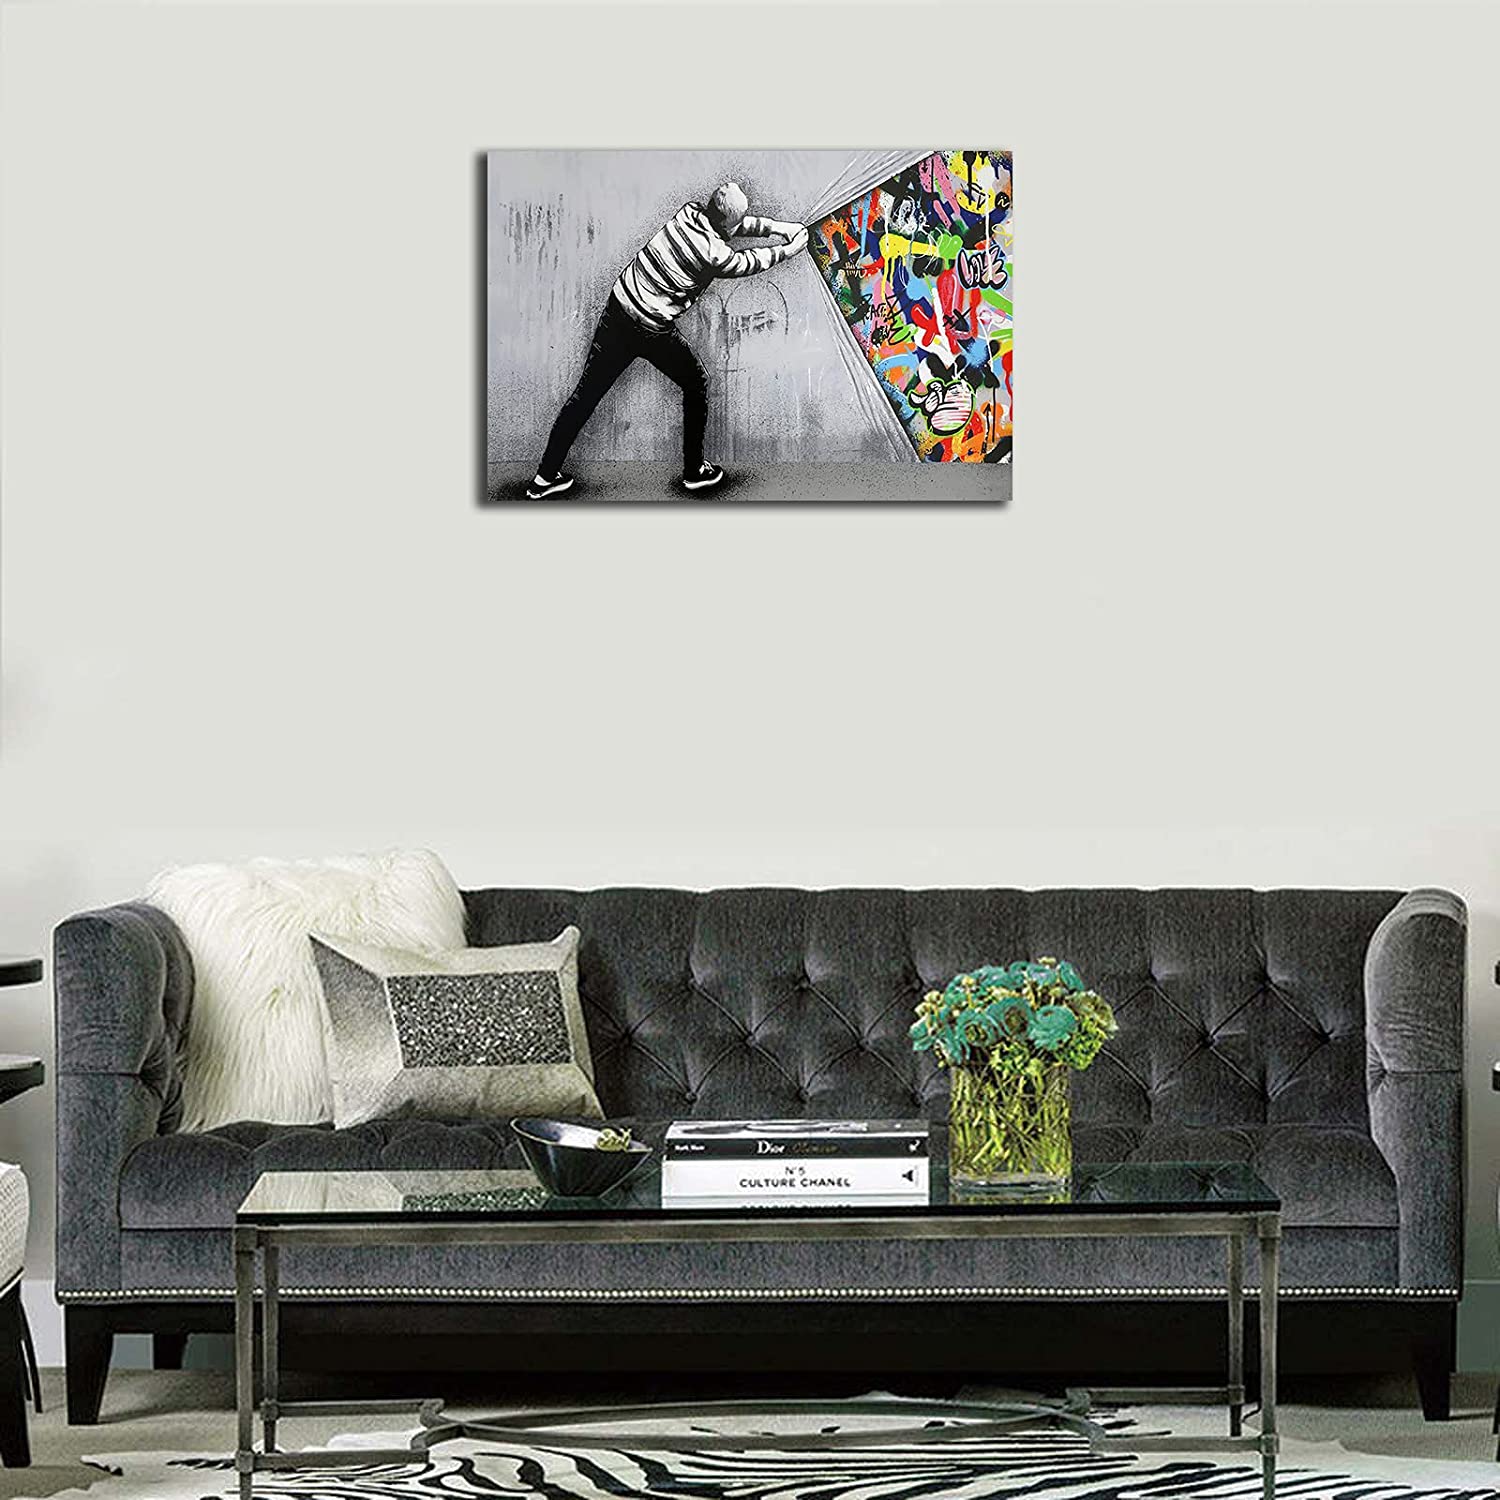 Graffiti Canvas Wall Art,Banksy Canvas Wall Art,Modern Banksy Street  Graffiti Wall Art,Colorful Graffiti Street Wall Art,Behind the Curtain Graffiti  Art Painting for Home Decor 12x18 Inches